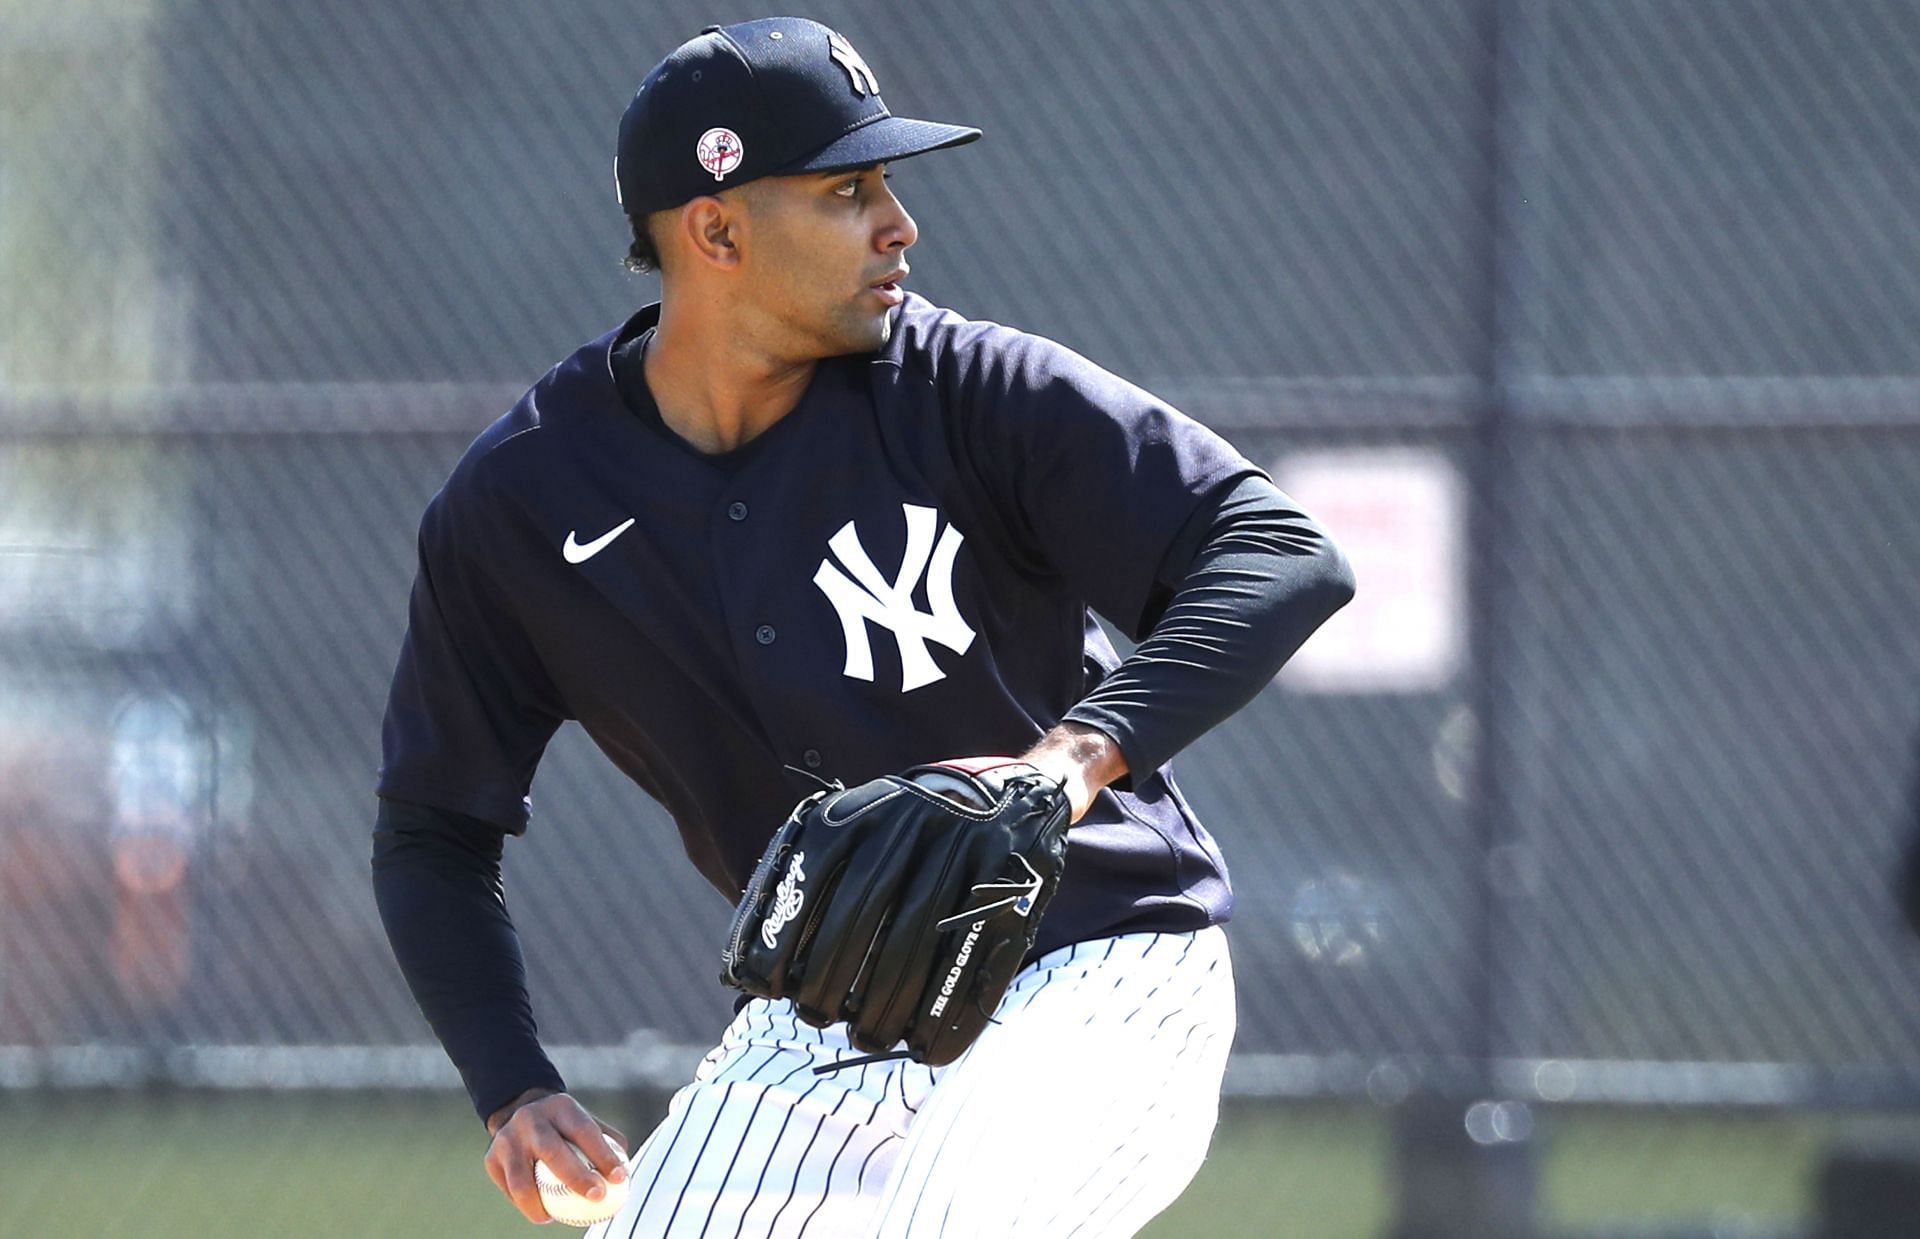 Yoendrys Gomez has been recalled to the side from the Yankees double A affiliate